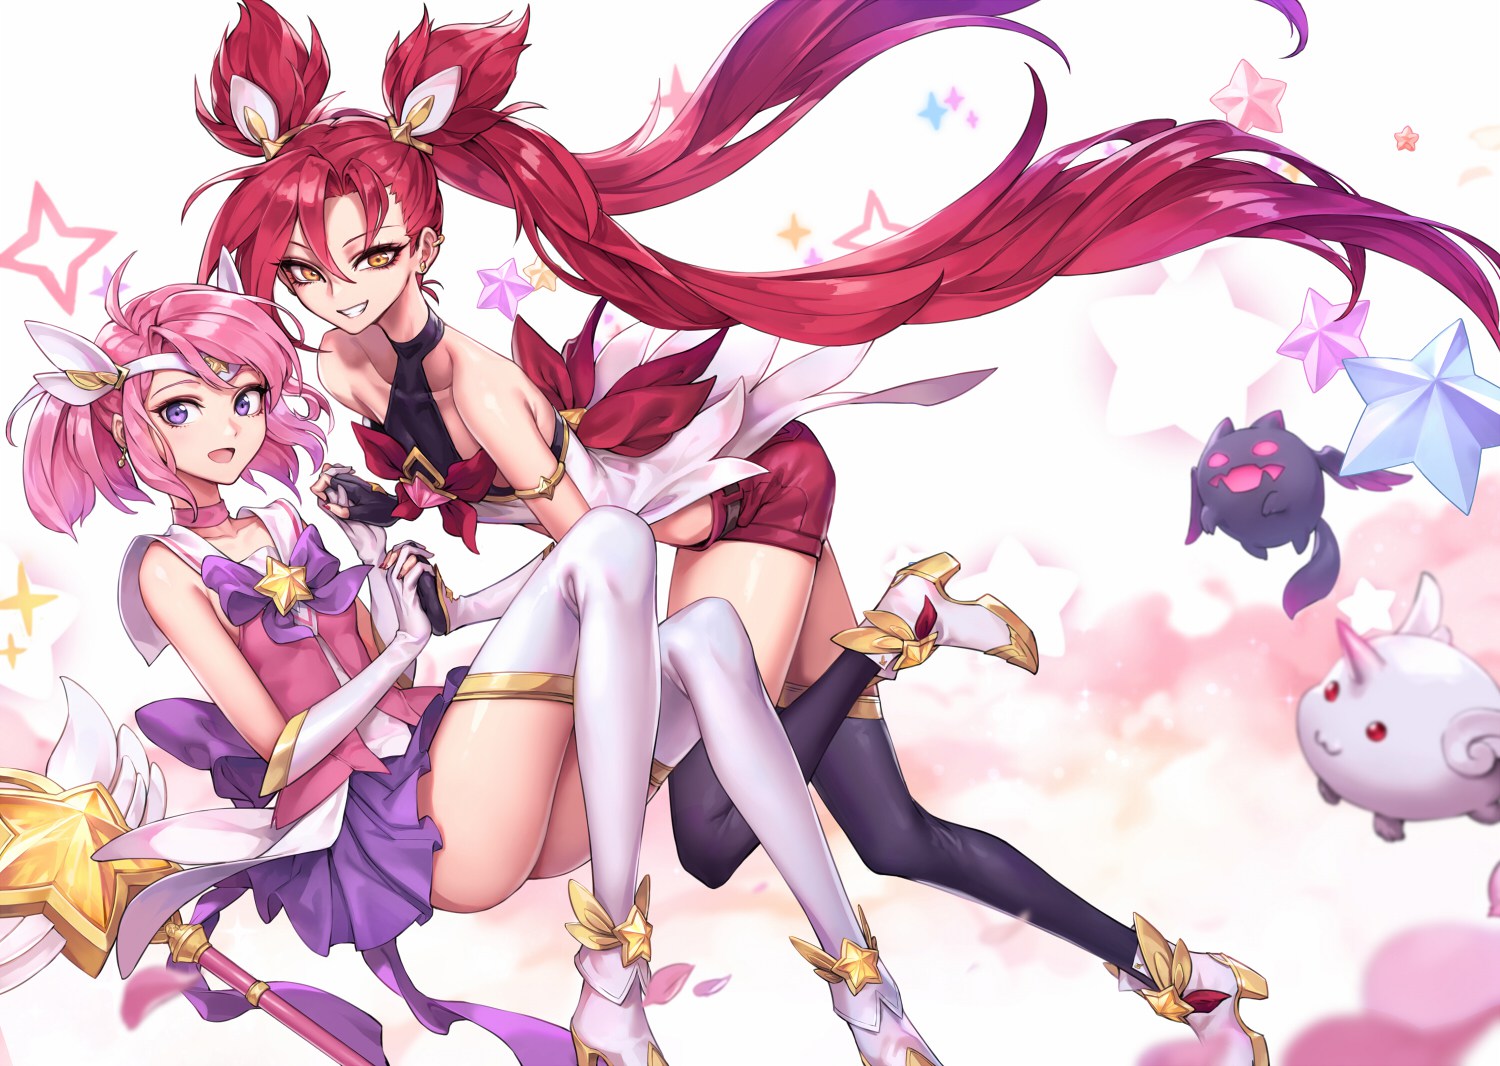 __jinx_luxanna_crownguard_star_guardian_jinx_and_star_guardian_lux_league_of_legends_drawn_by_oopartz_yang__023b9aa2683d880c129eab49a8ce095c